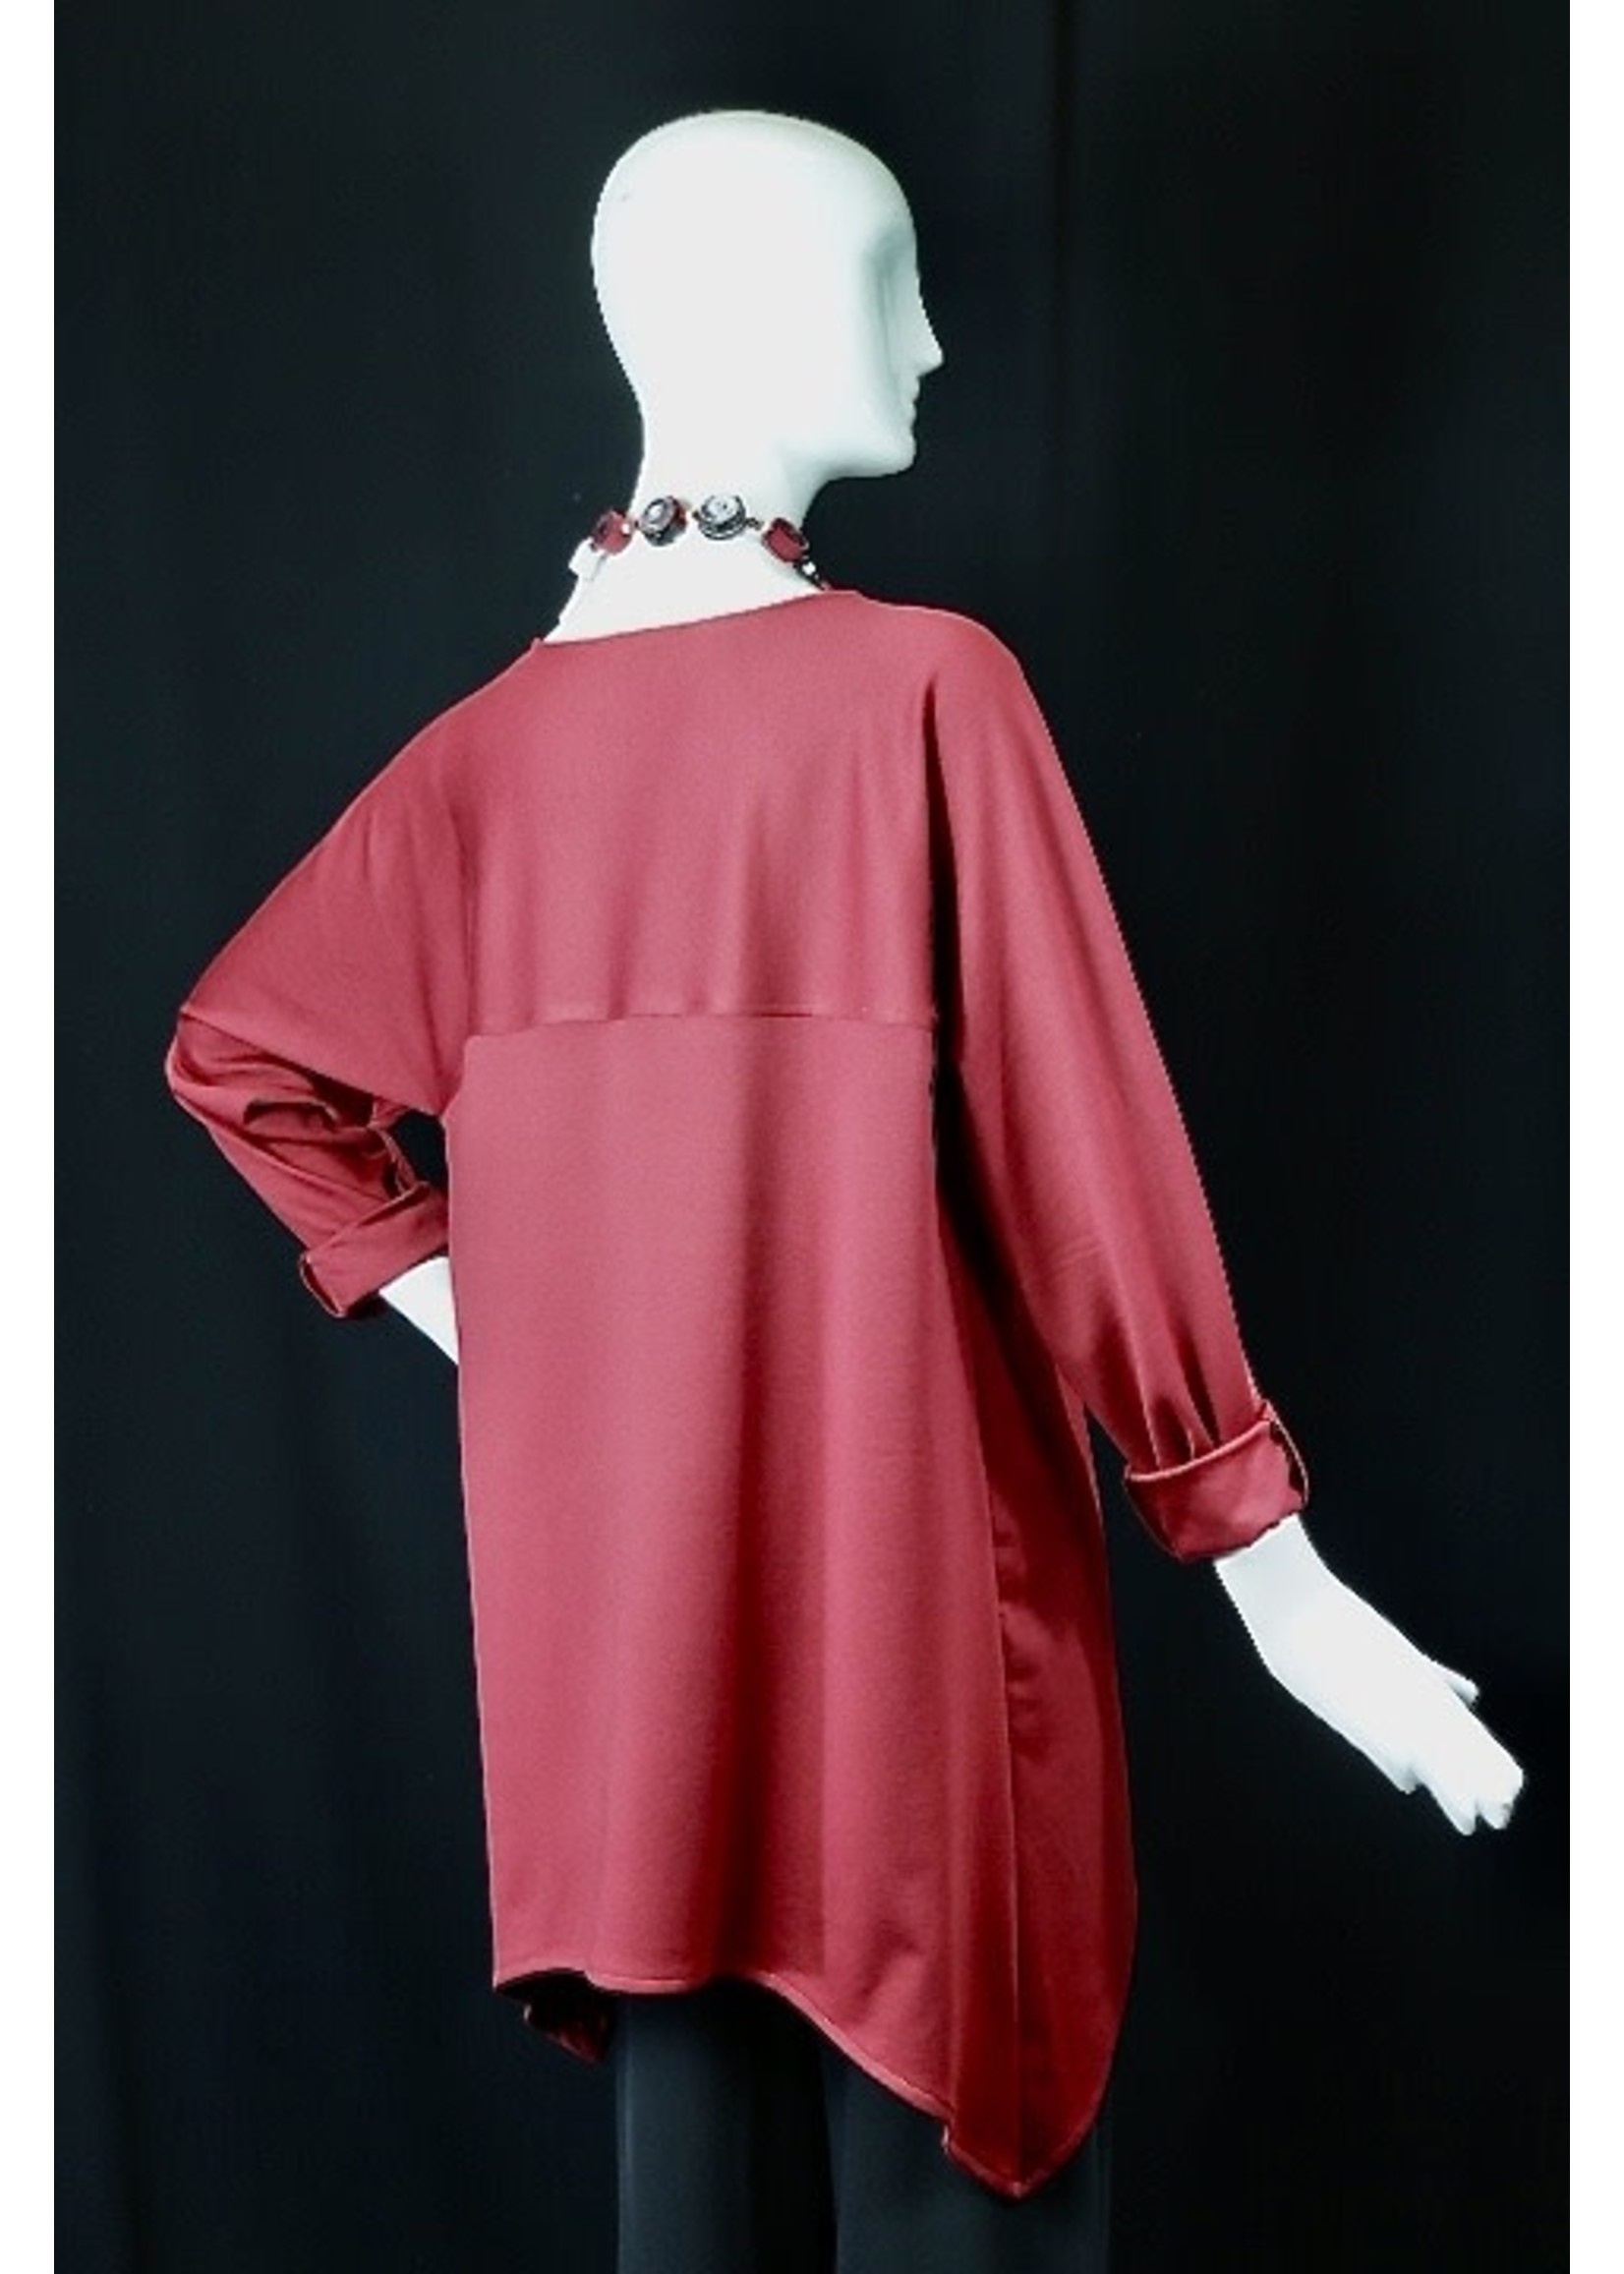 Tunic T2496-ST237-M-Cranberry knit tunic w/side points